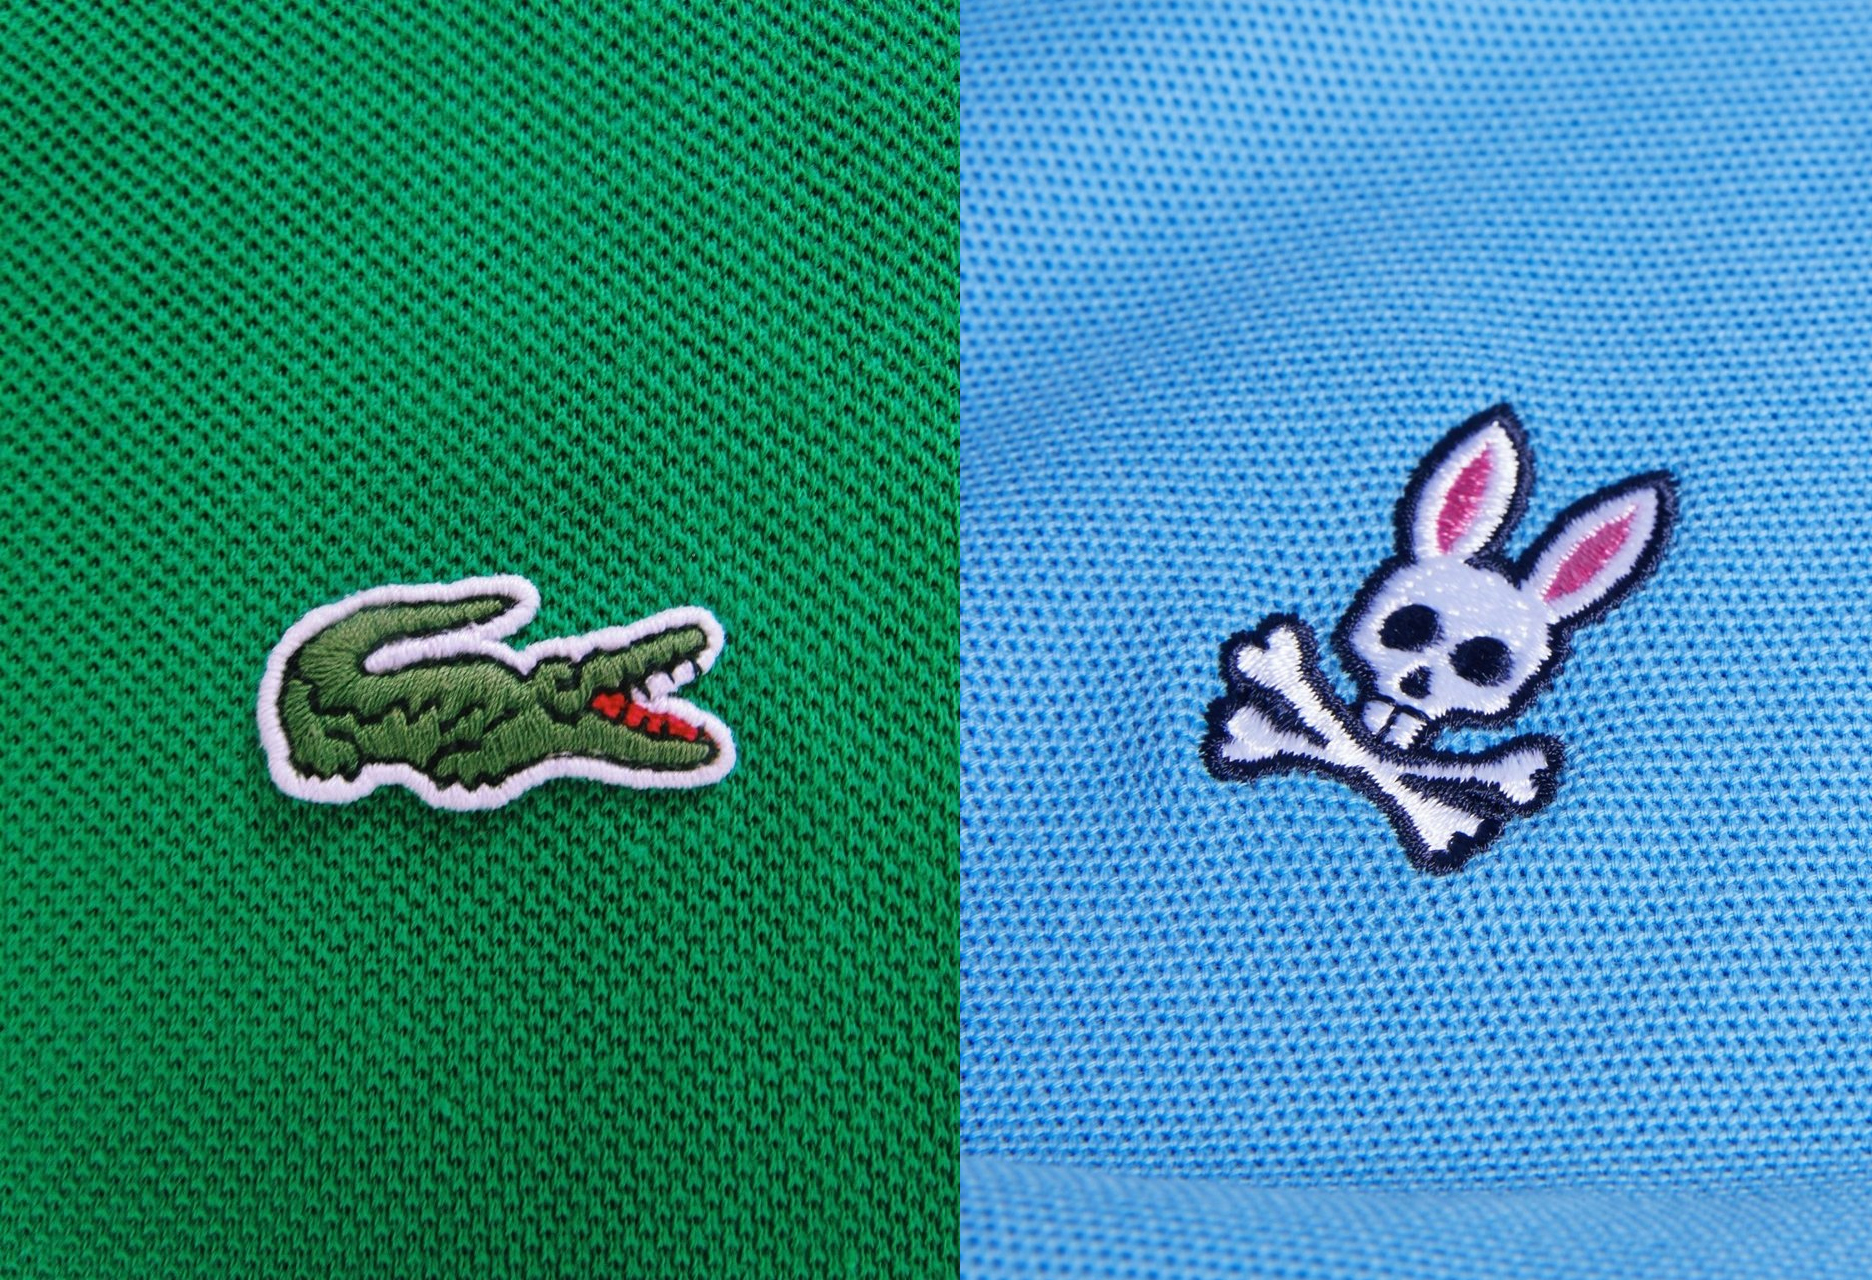 Forbes said the Psycho Bunny logo was intended to appeal to men who want a mascot that is edgier than the Ralph Lauren horse or the Lacoste crocodile on their polo shirt.